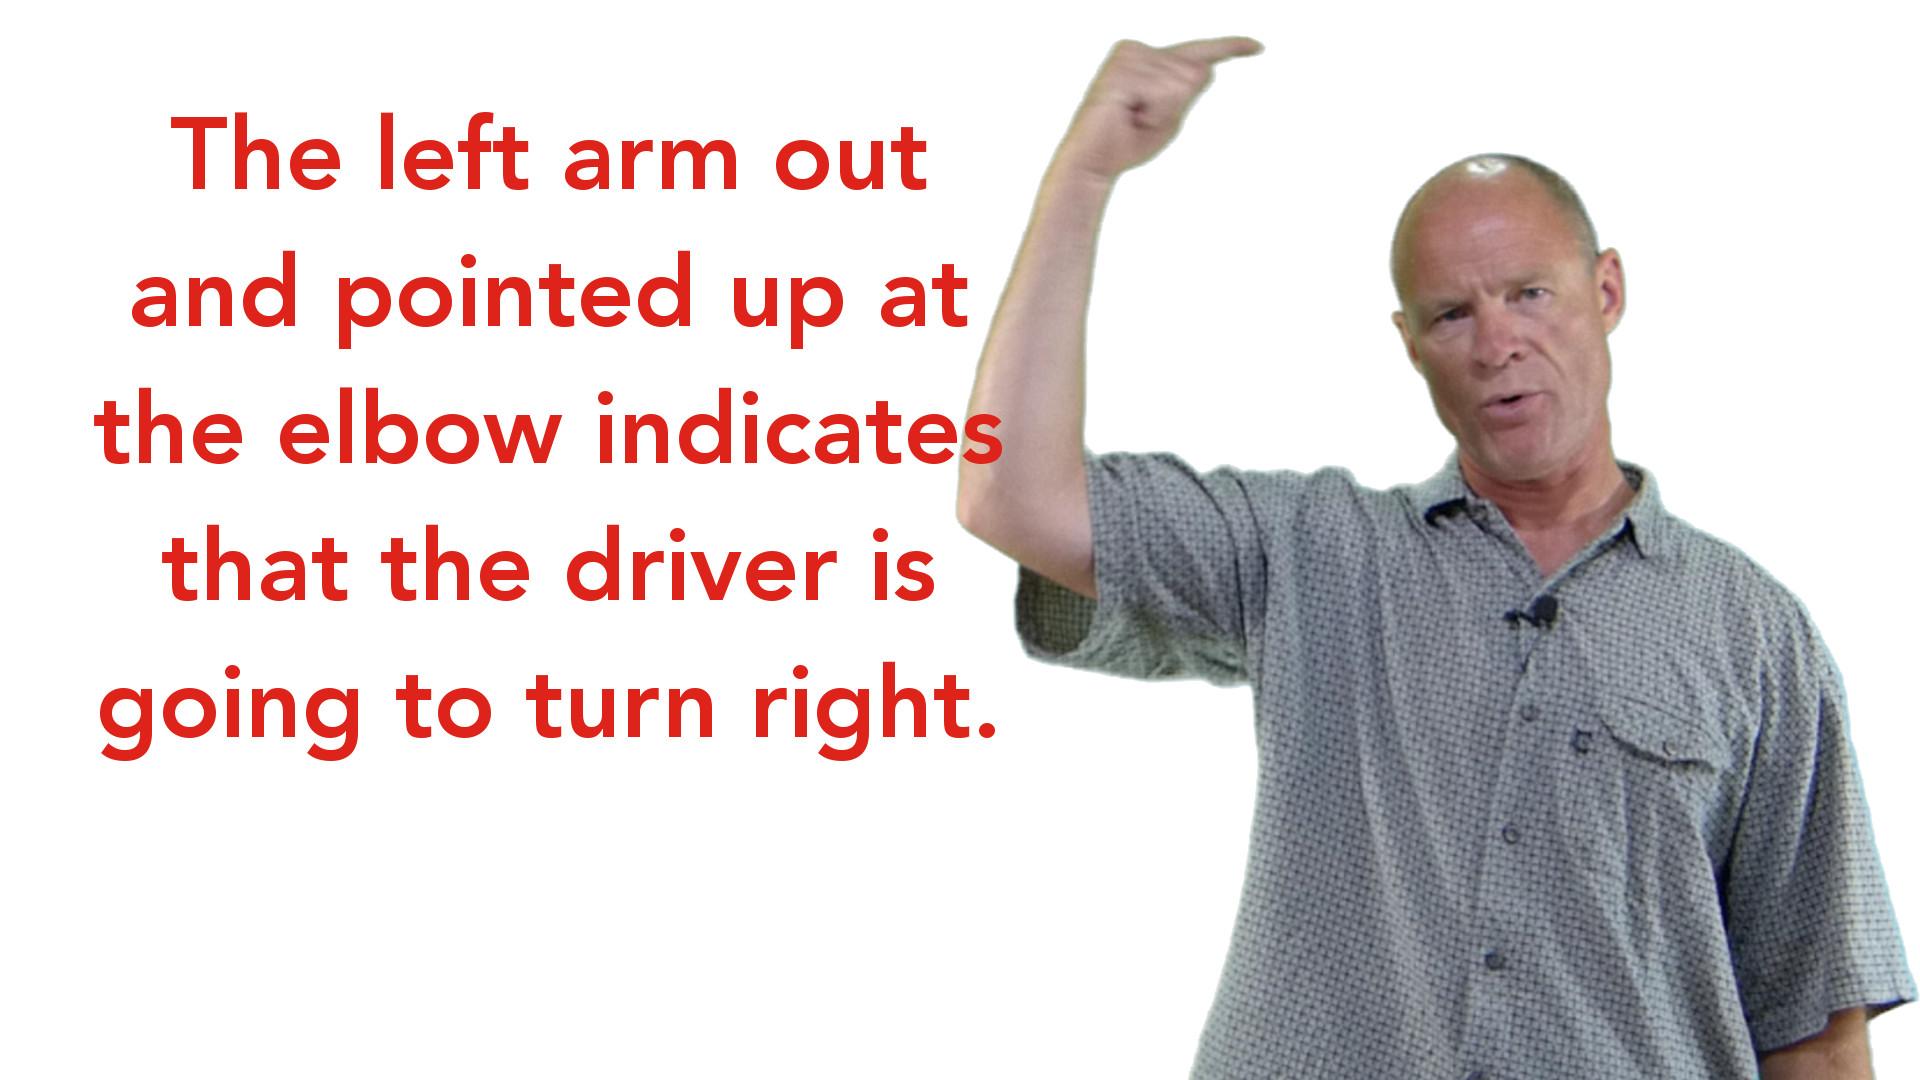 Driving hand signal indicating that the vehicle is going to turn left